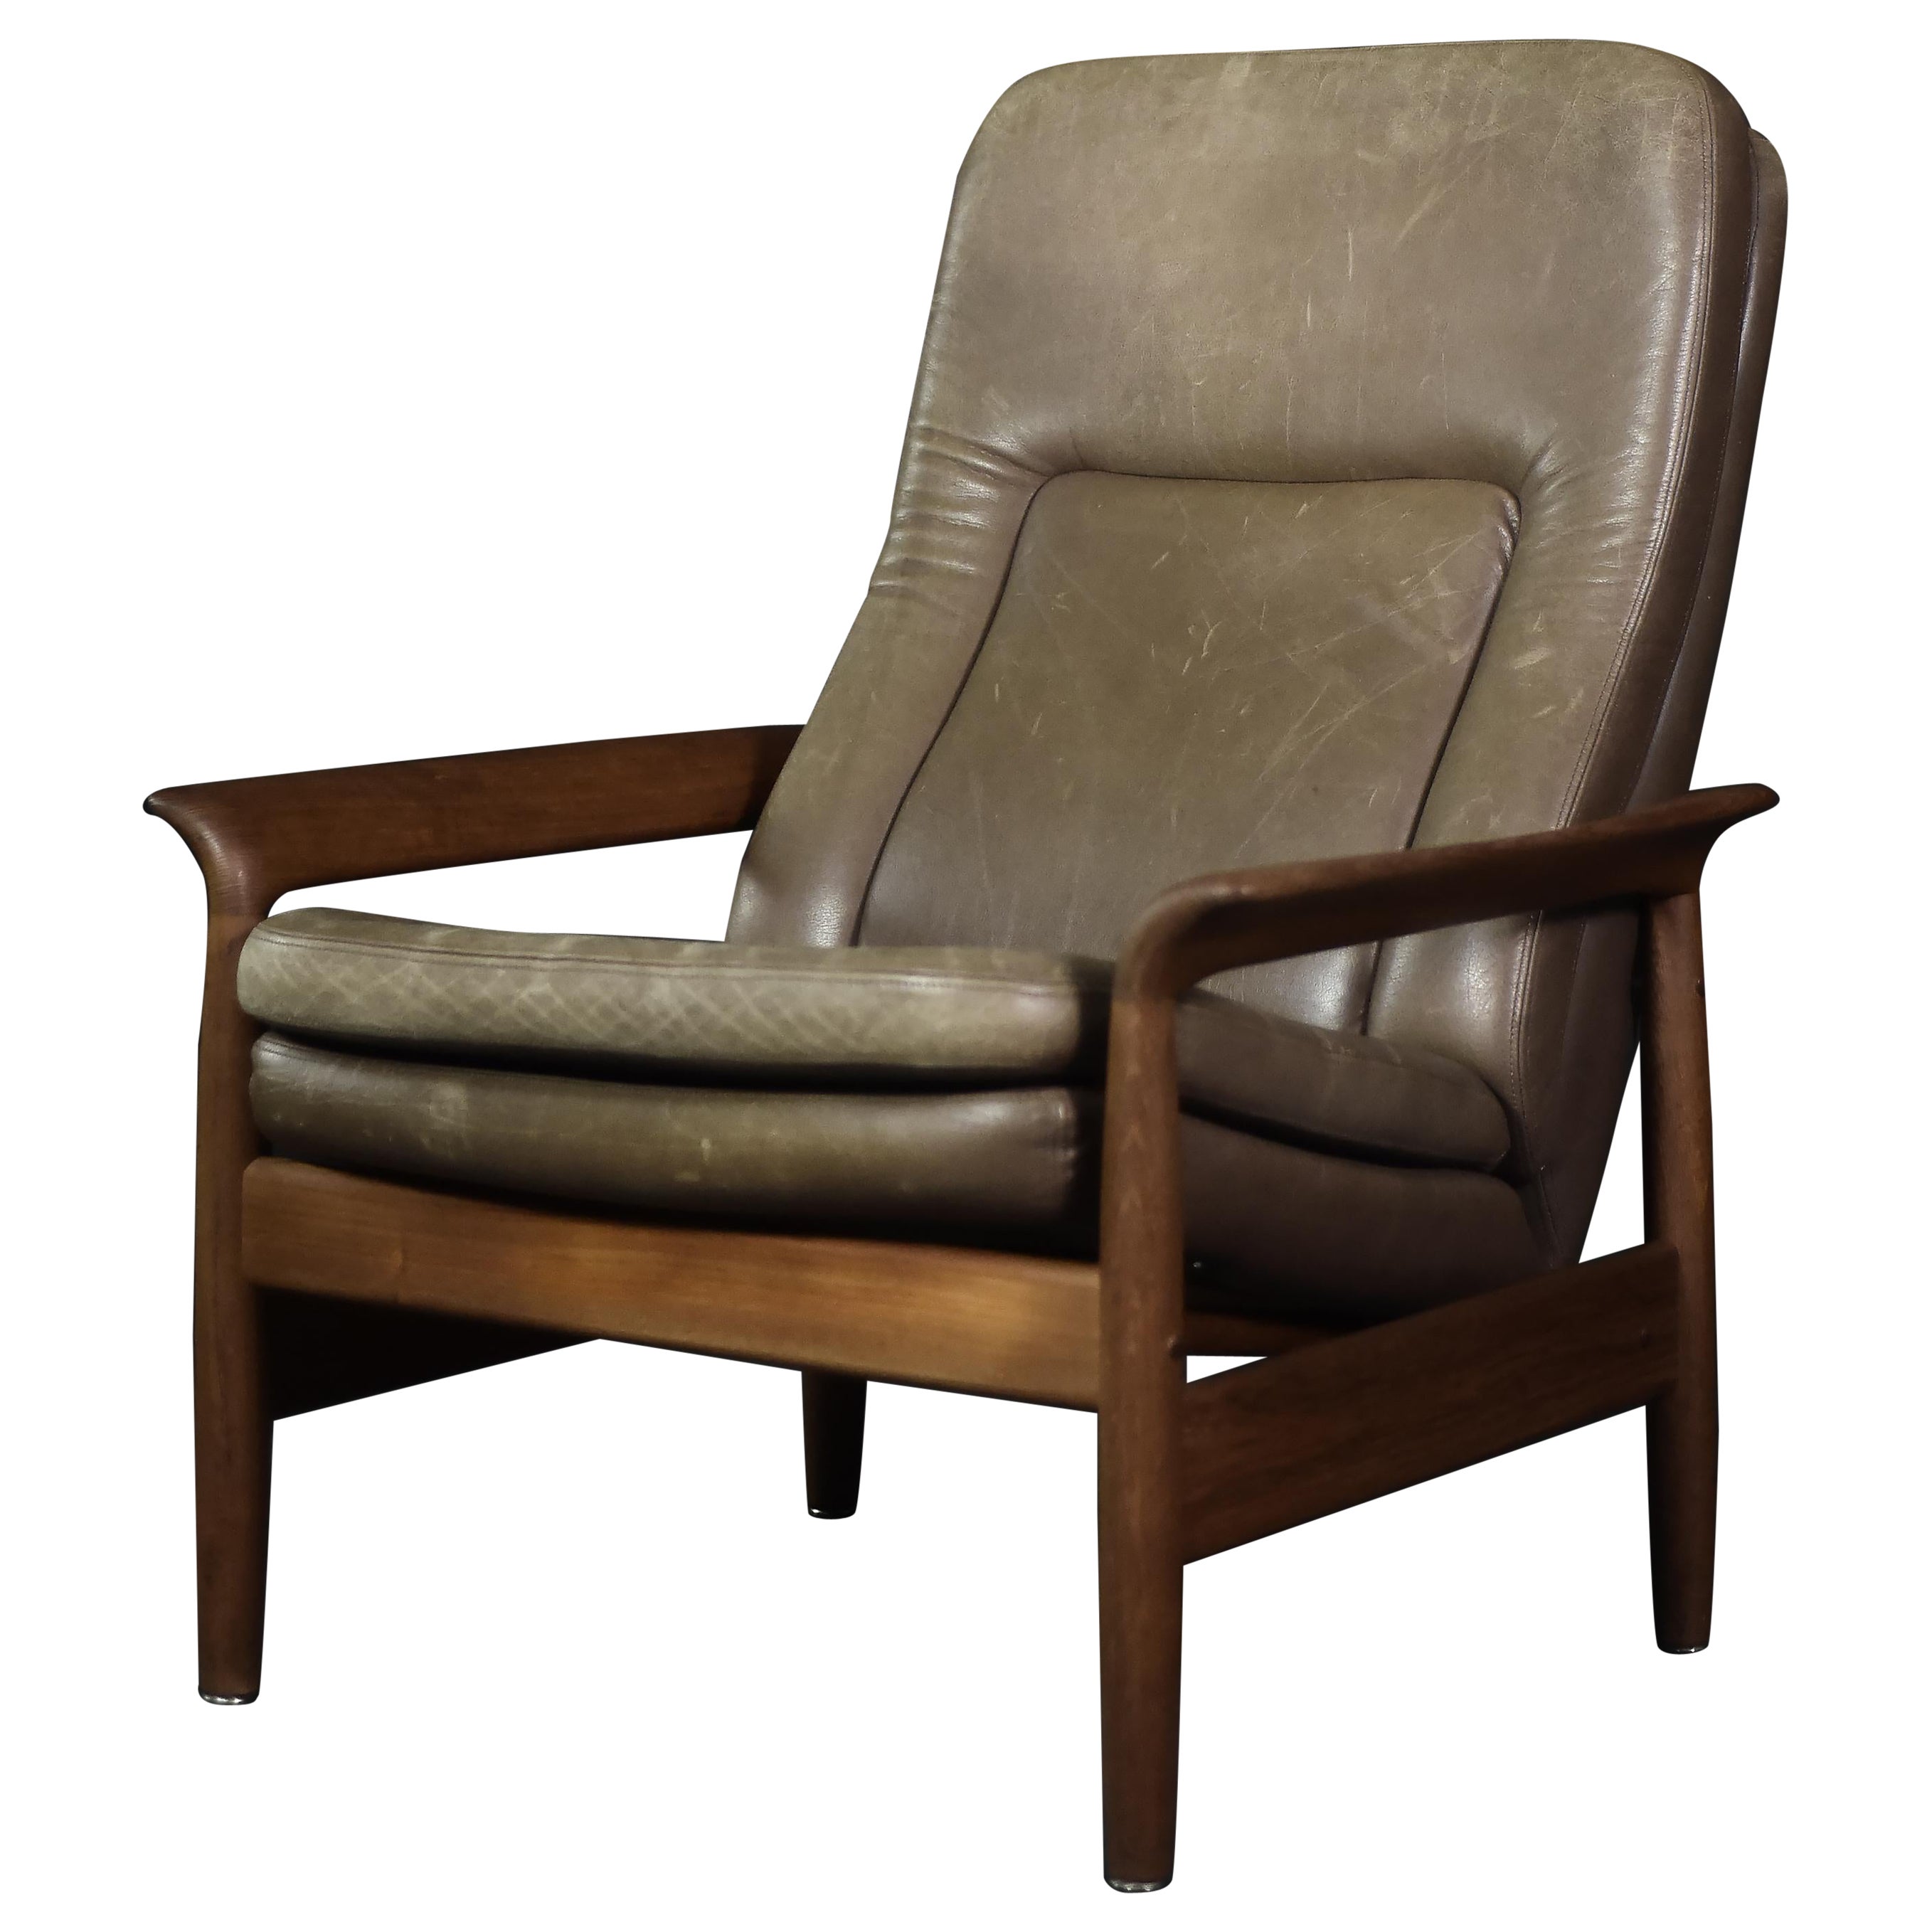 Vintage Mid-Century Danish Modern Teak&Leather Armchair with Reclining Backrest For Sale